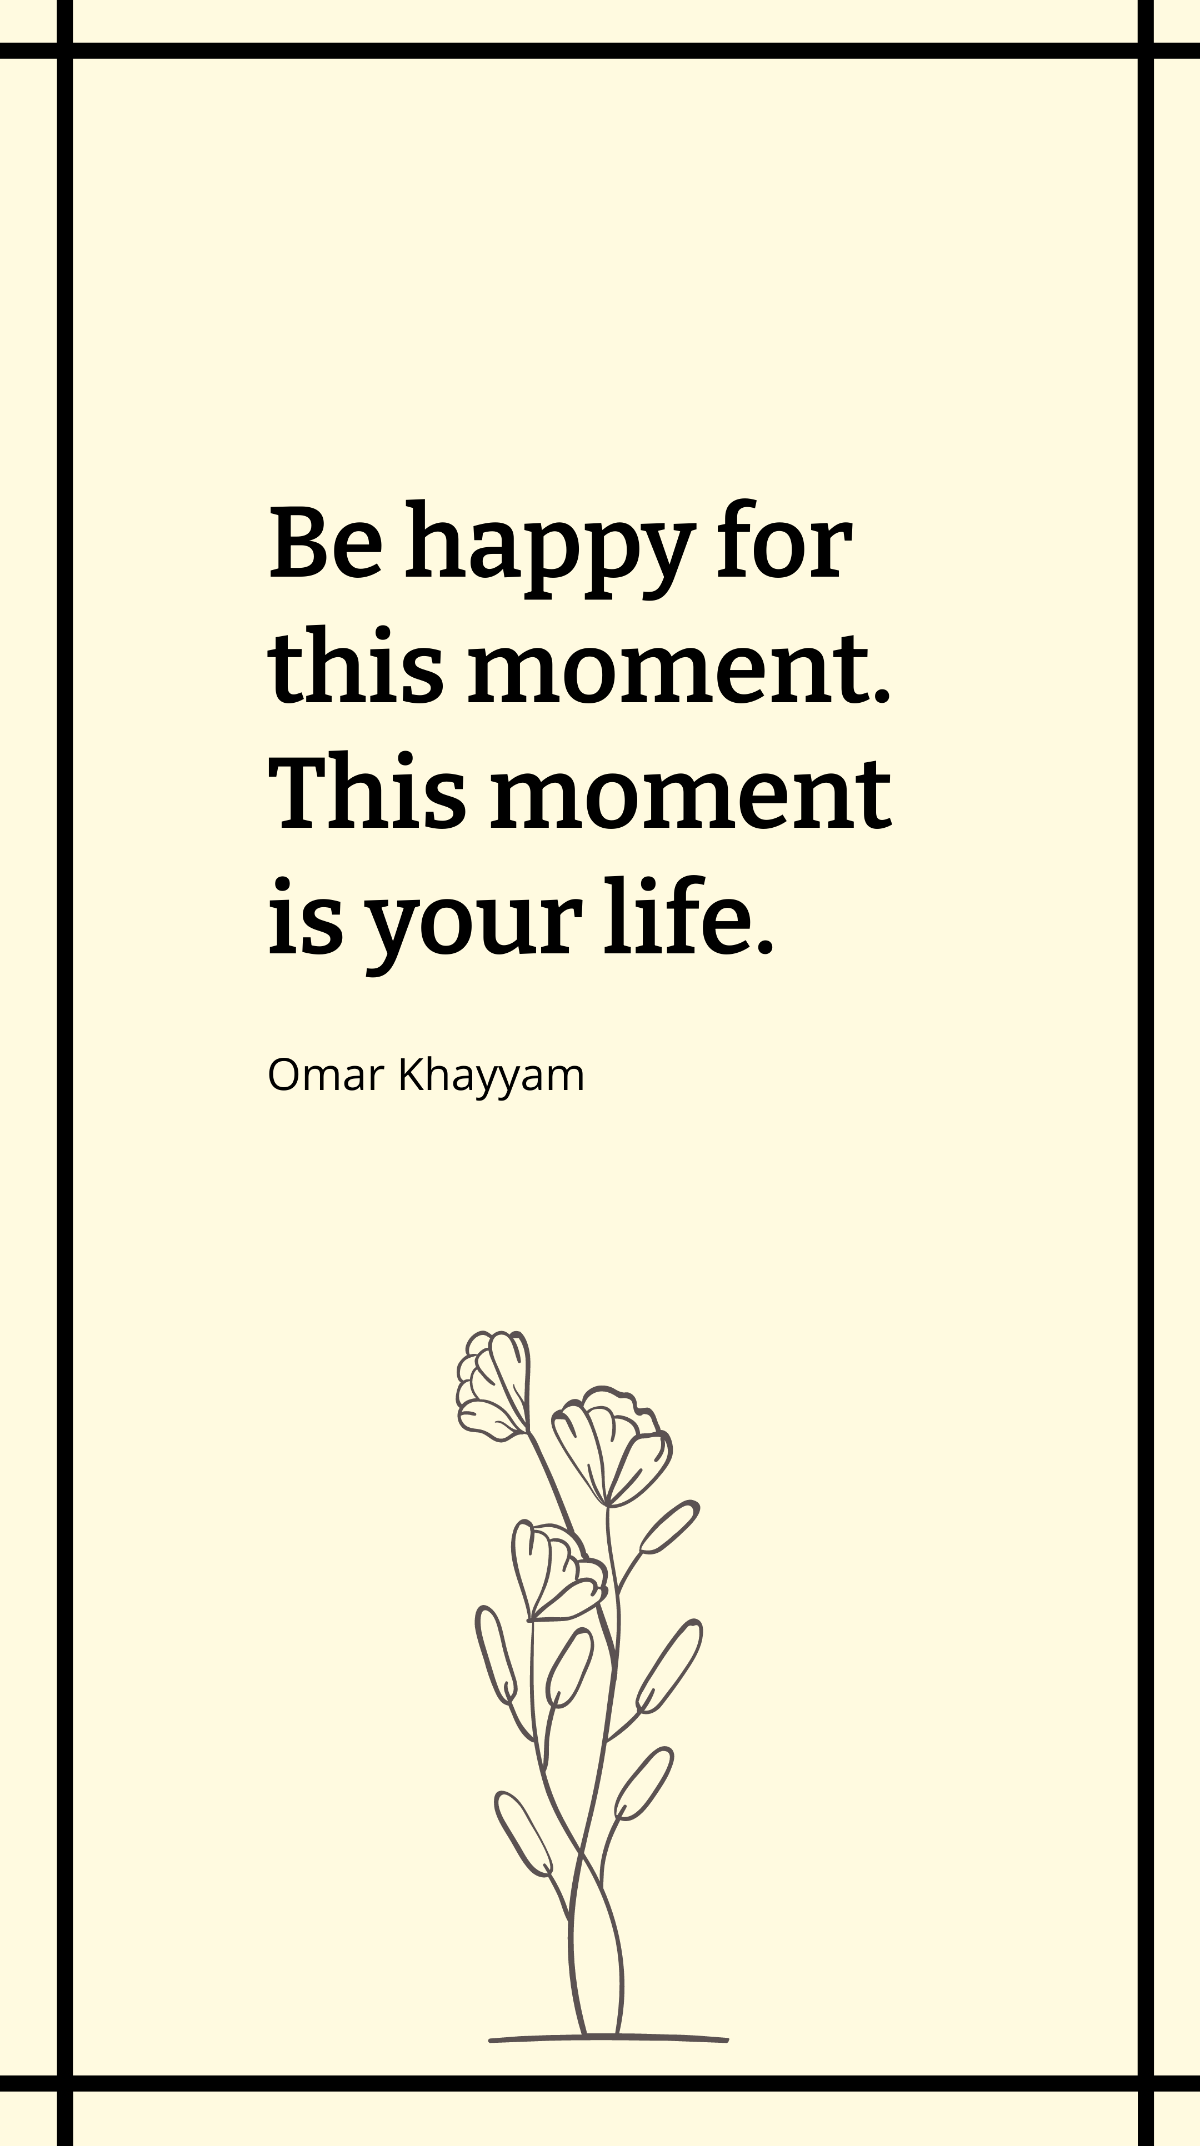 Omar Khayyam - Be happy for this moment. This moment is your life. Template